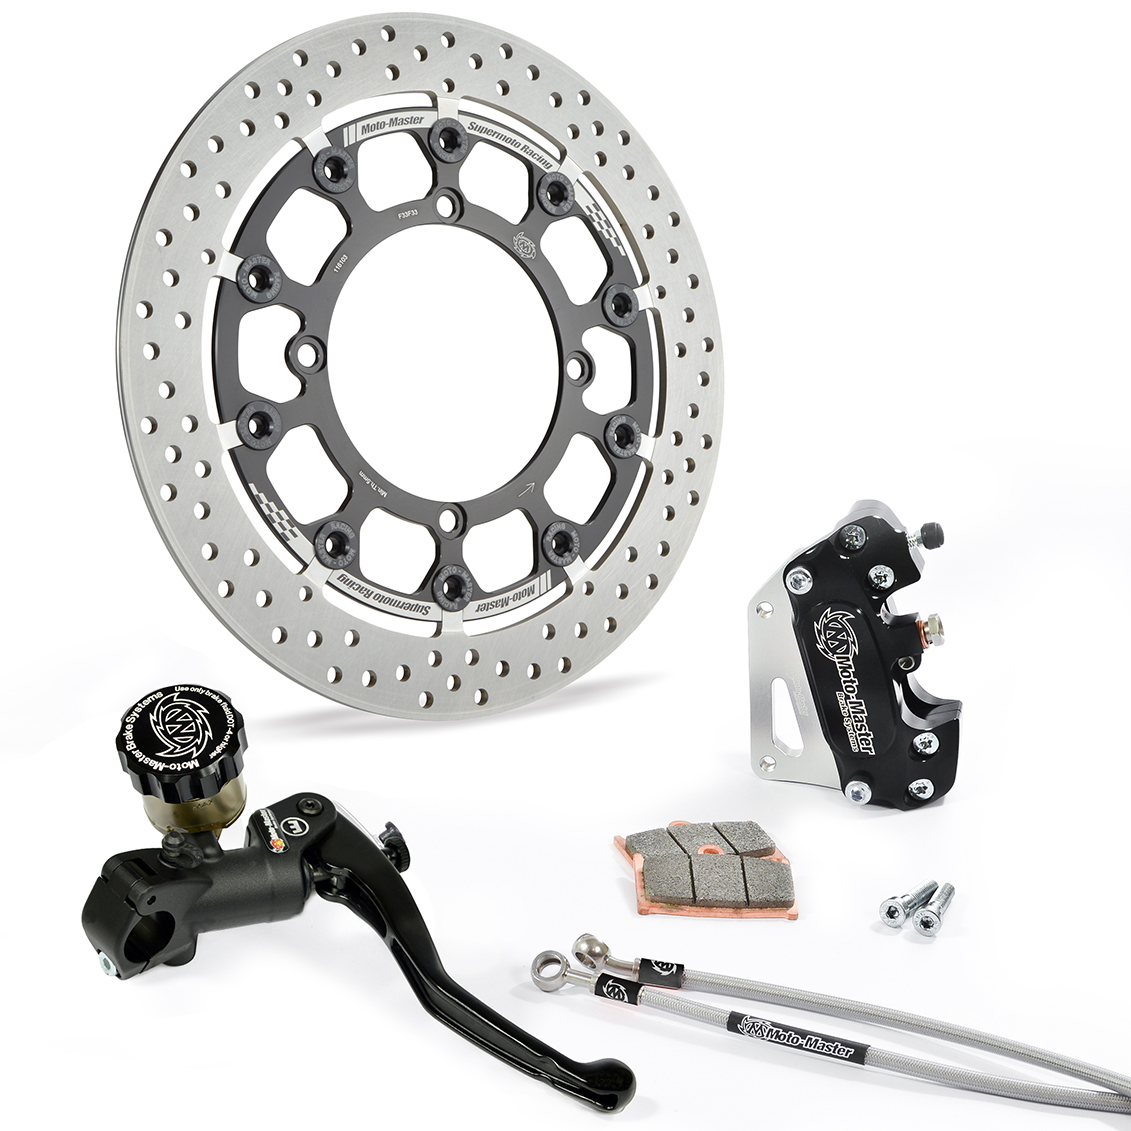 Halo T-Floater 5.5 Supermoto Racing Kit